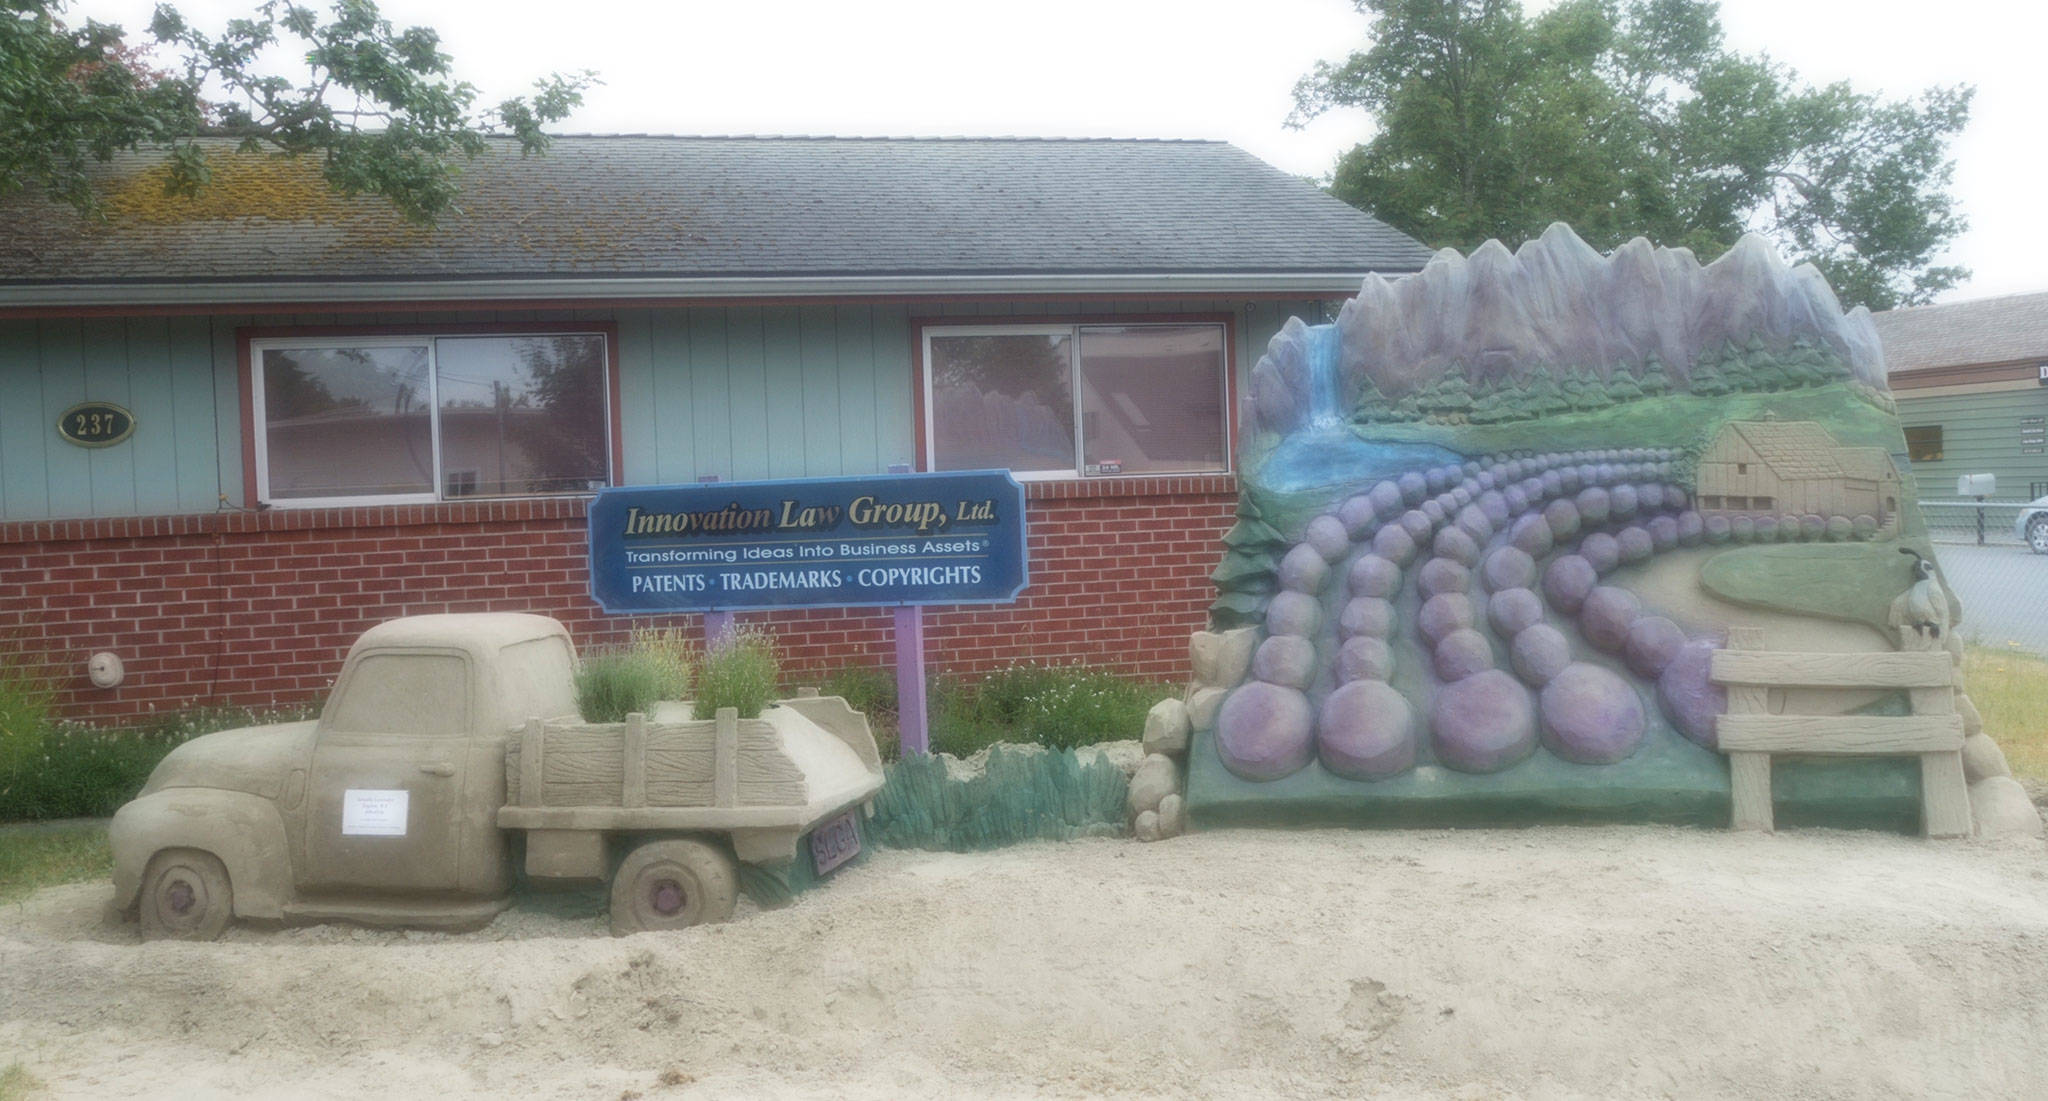 Local sand sculpting artist Kali Bradford carved a sand sculpture of a blooming lavender field and the attendant farm truck for Sequim Lavender Weekend in 2015 at Jacques Dulin Innovation of Law Building on North Sequim Avenue. Submitted photo.